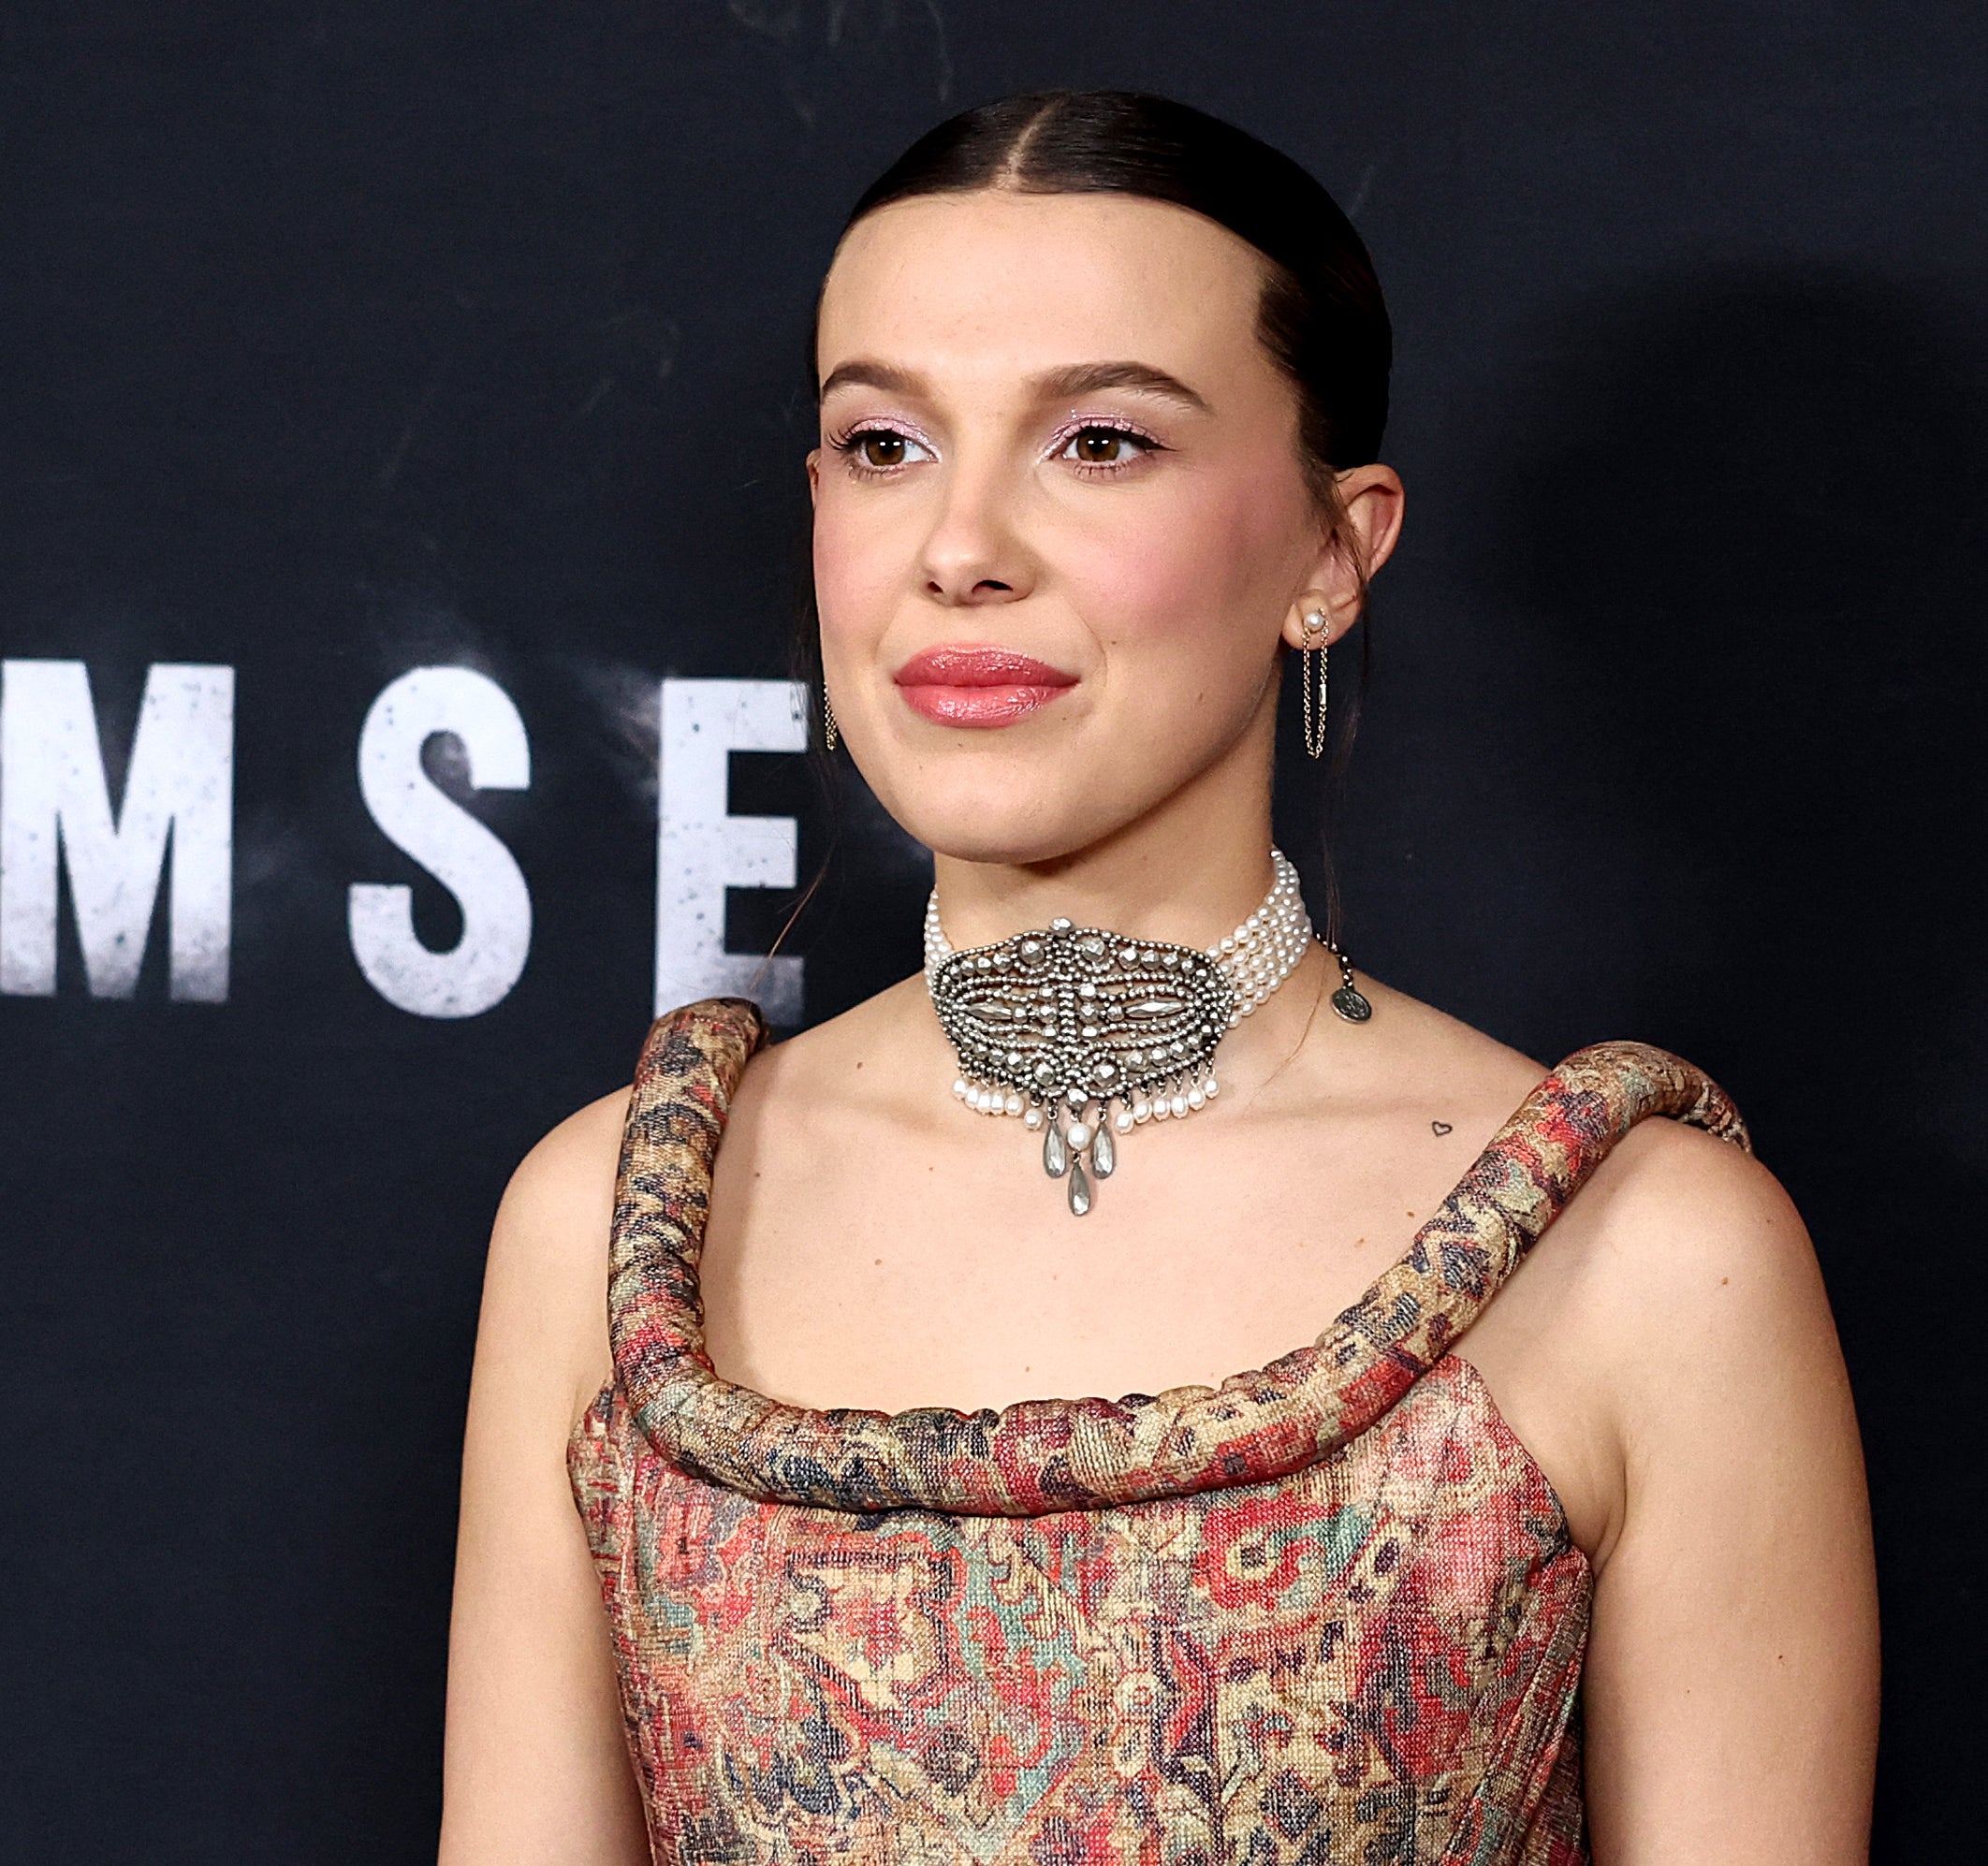 Millie wearing an ornate choker necklace and patterned dress as she poses at a media event